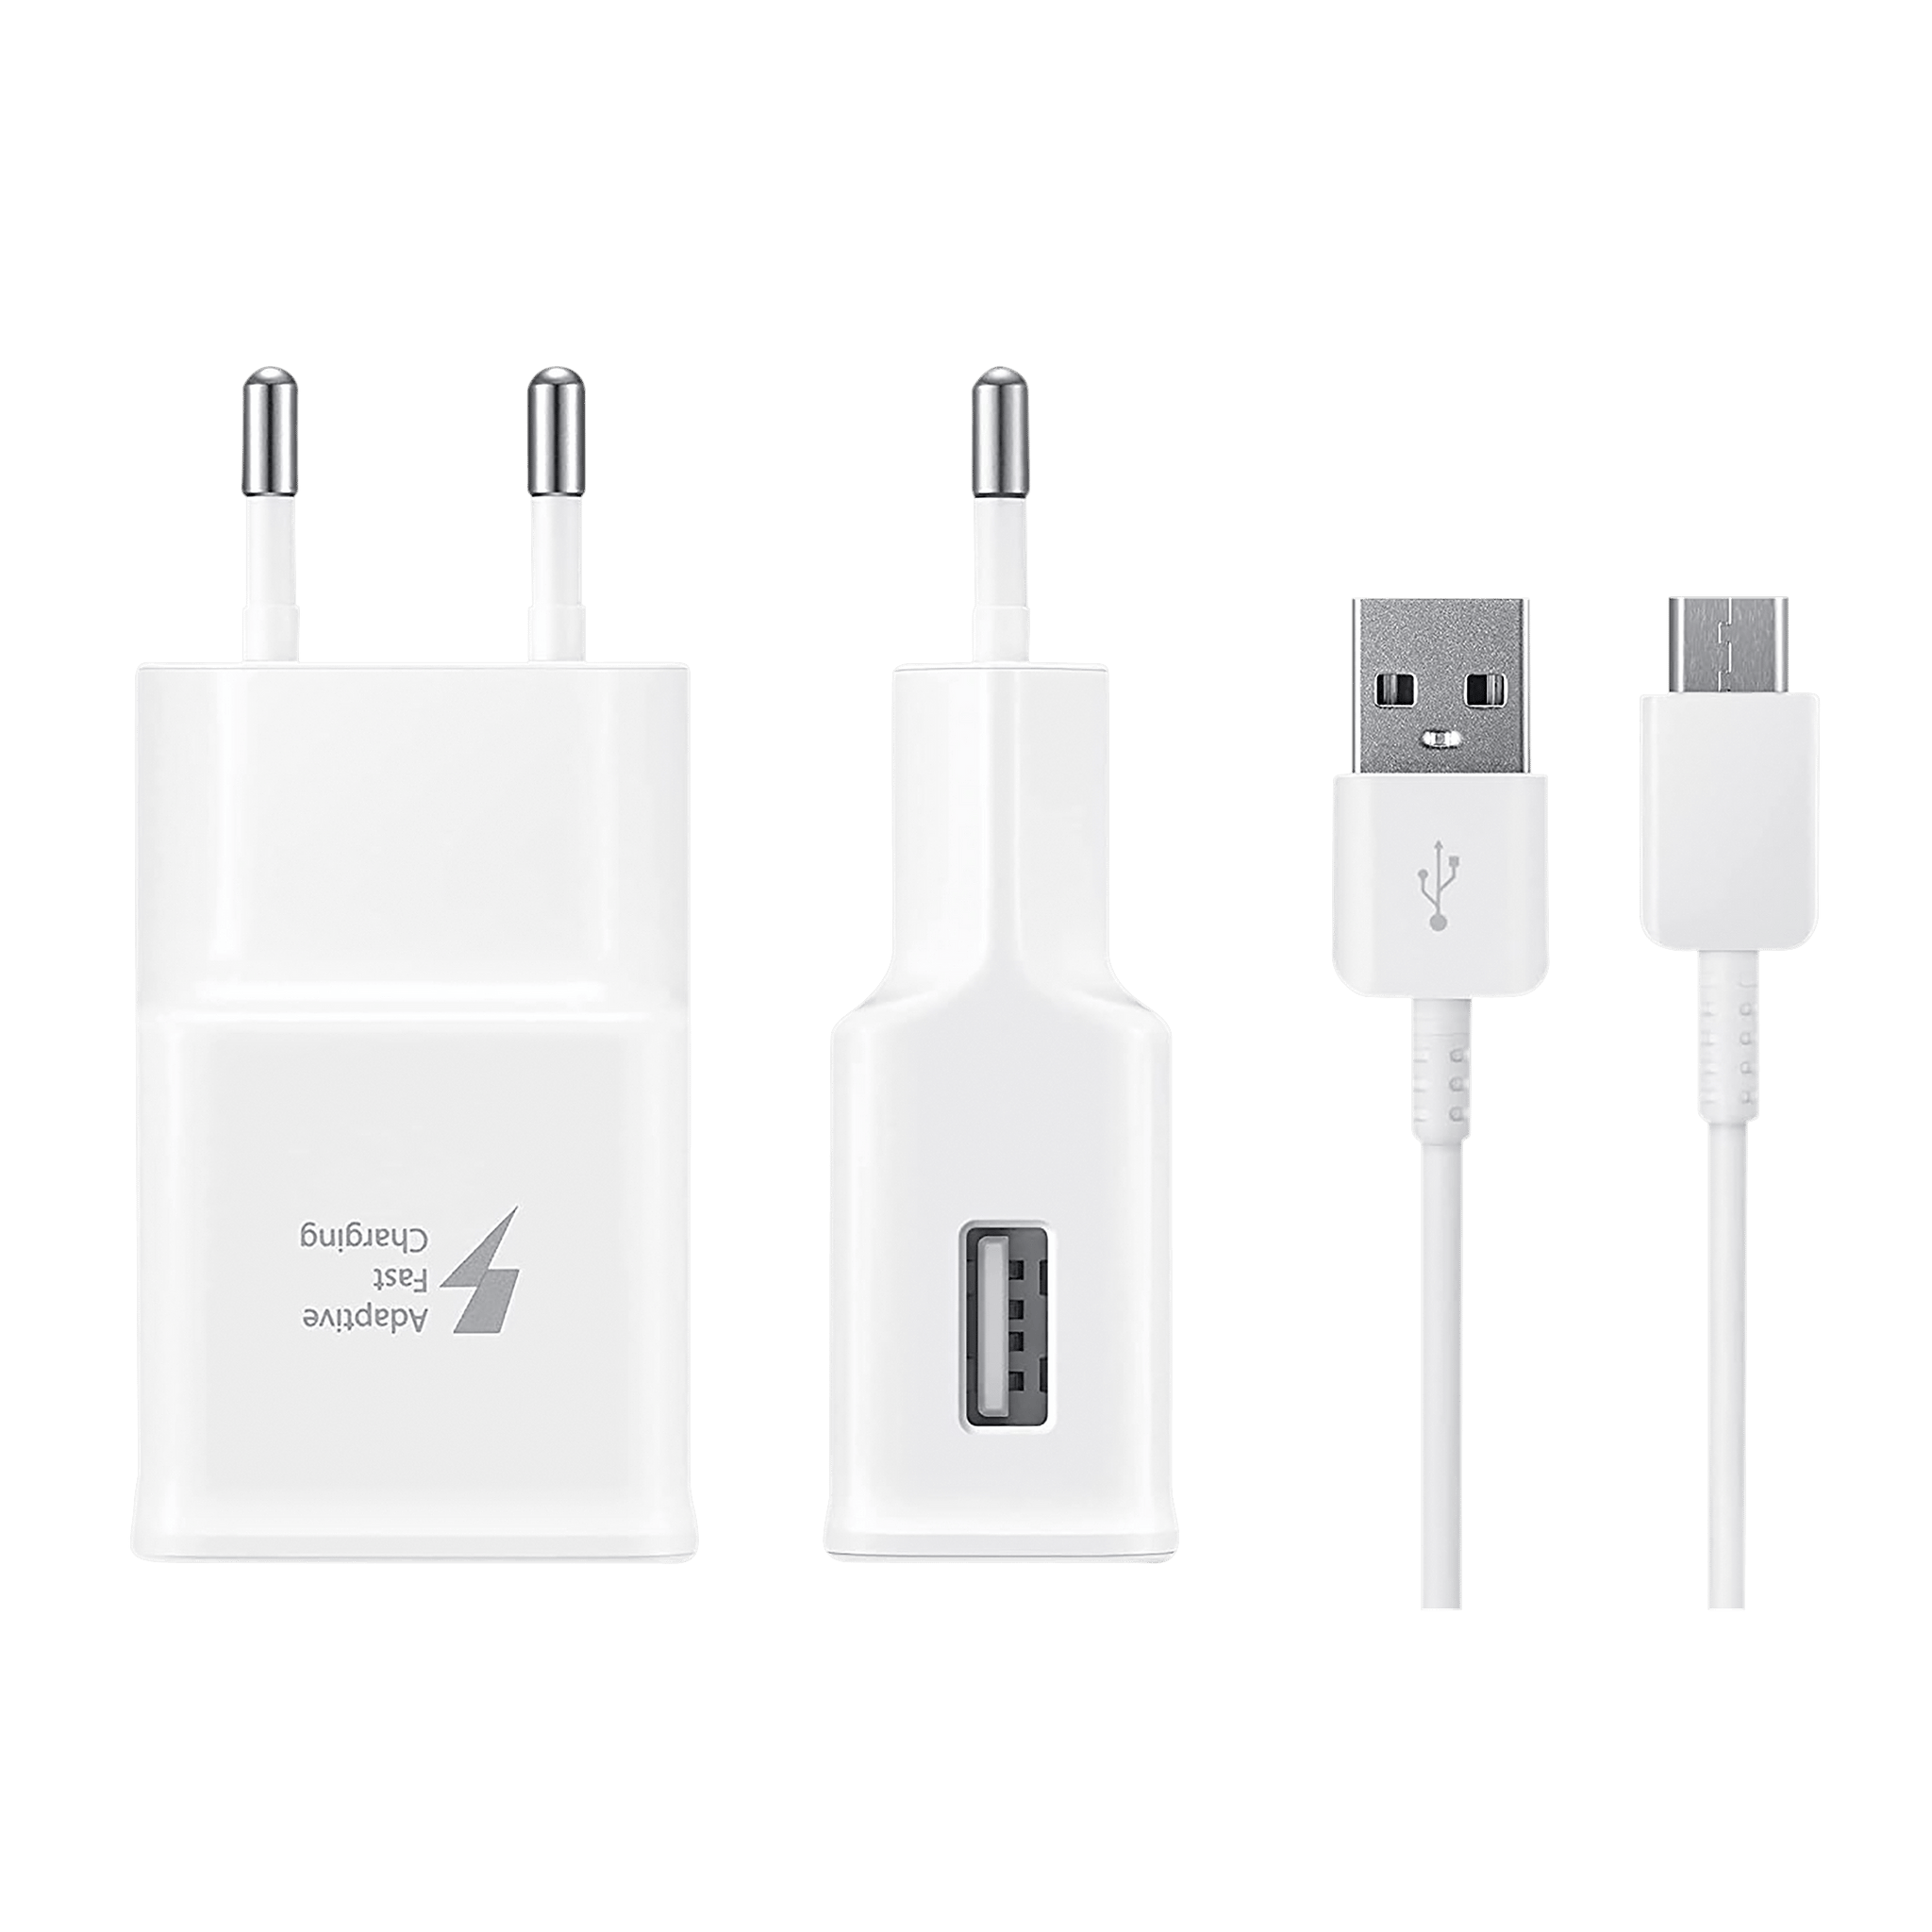  Samsung 15W Fast Charger (Type A to Type C Cable, Sync & Transfer)